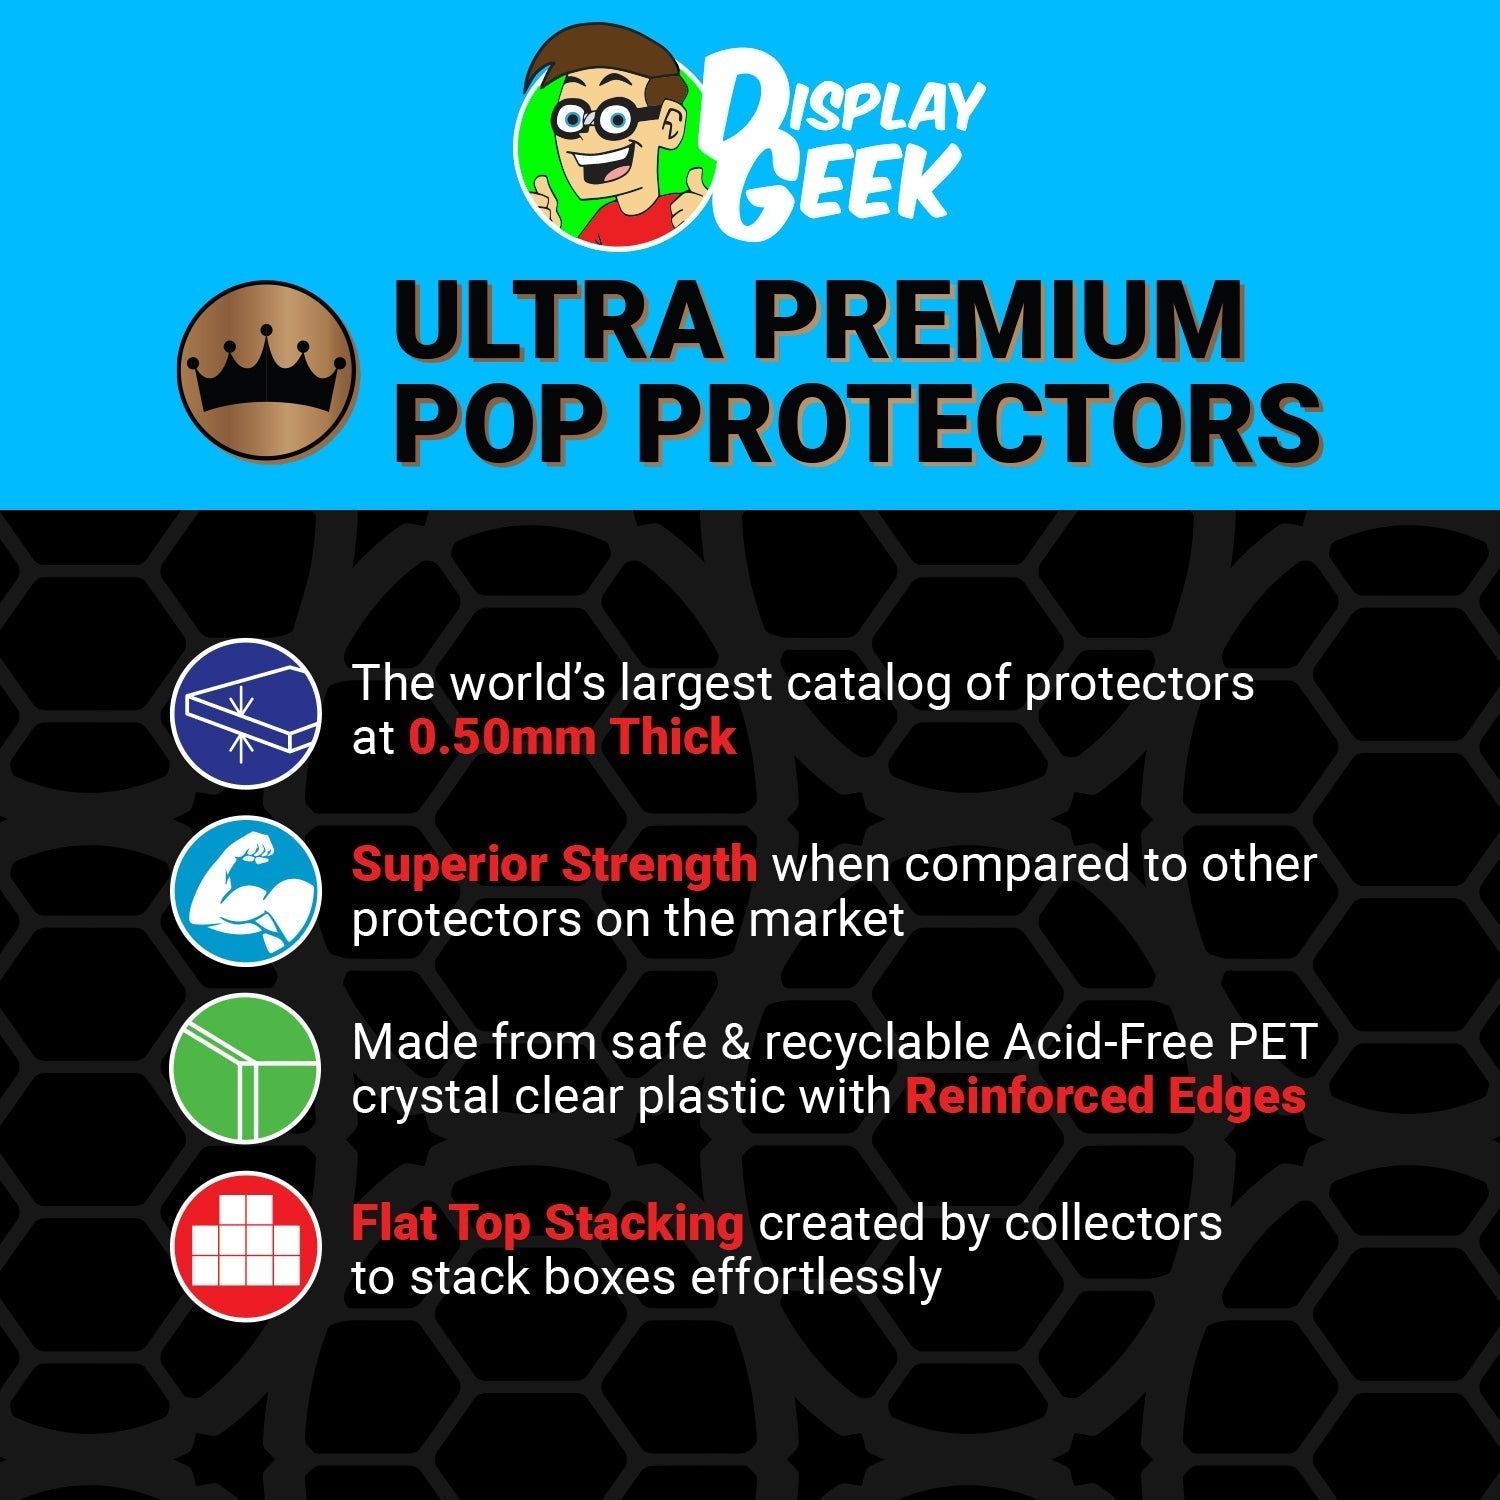 Pop Protector for U2 Pop #46 Funko Pop Albums Deluxe - PPG Pop Protector Guide Search Created by Display Geek